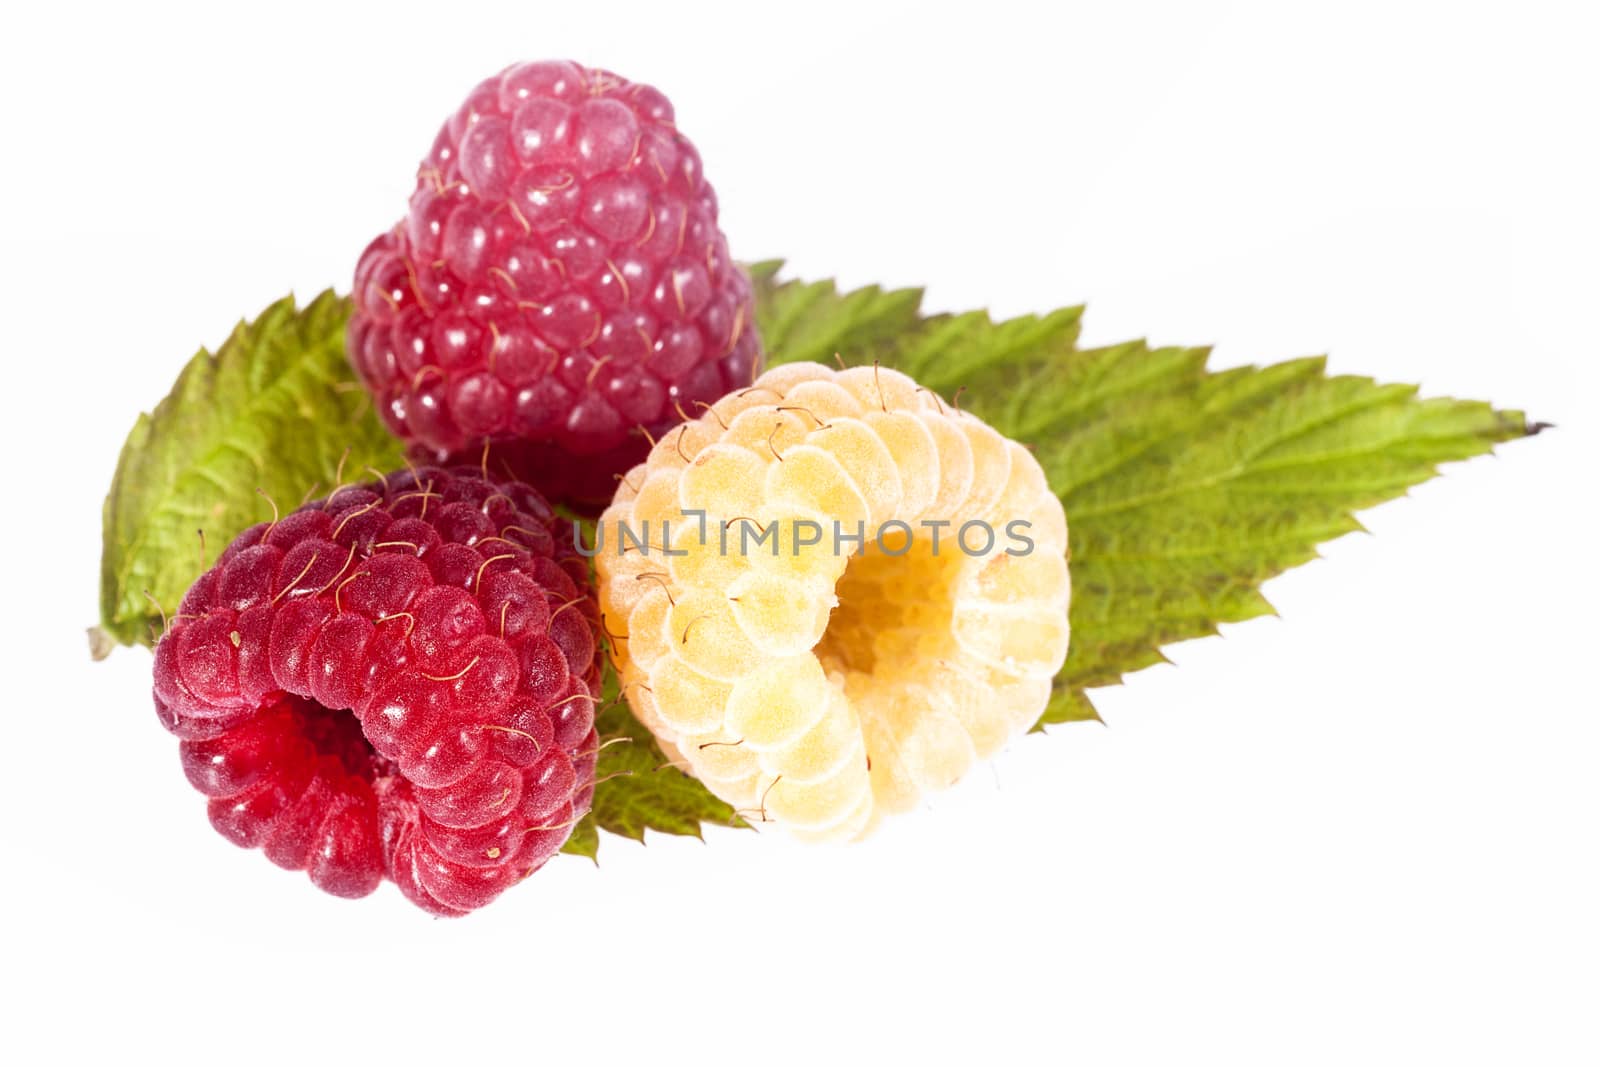 Red and white  raspberries on leaf isolated on white background  by mychadre77